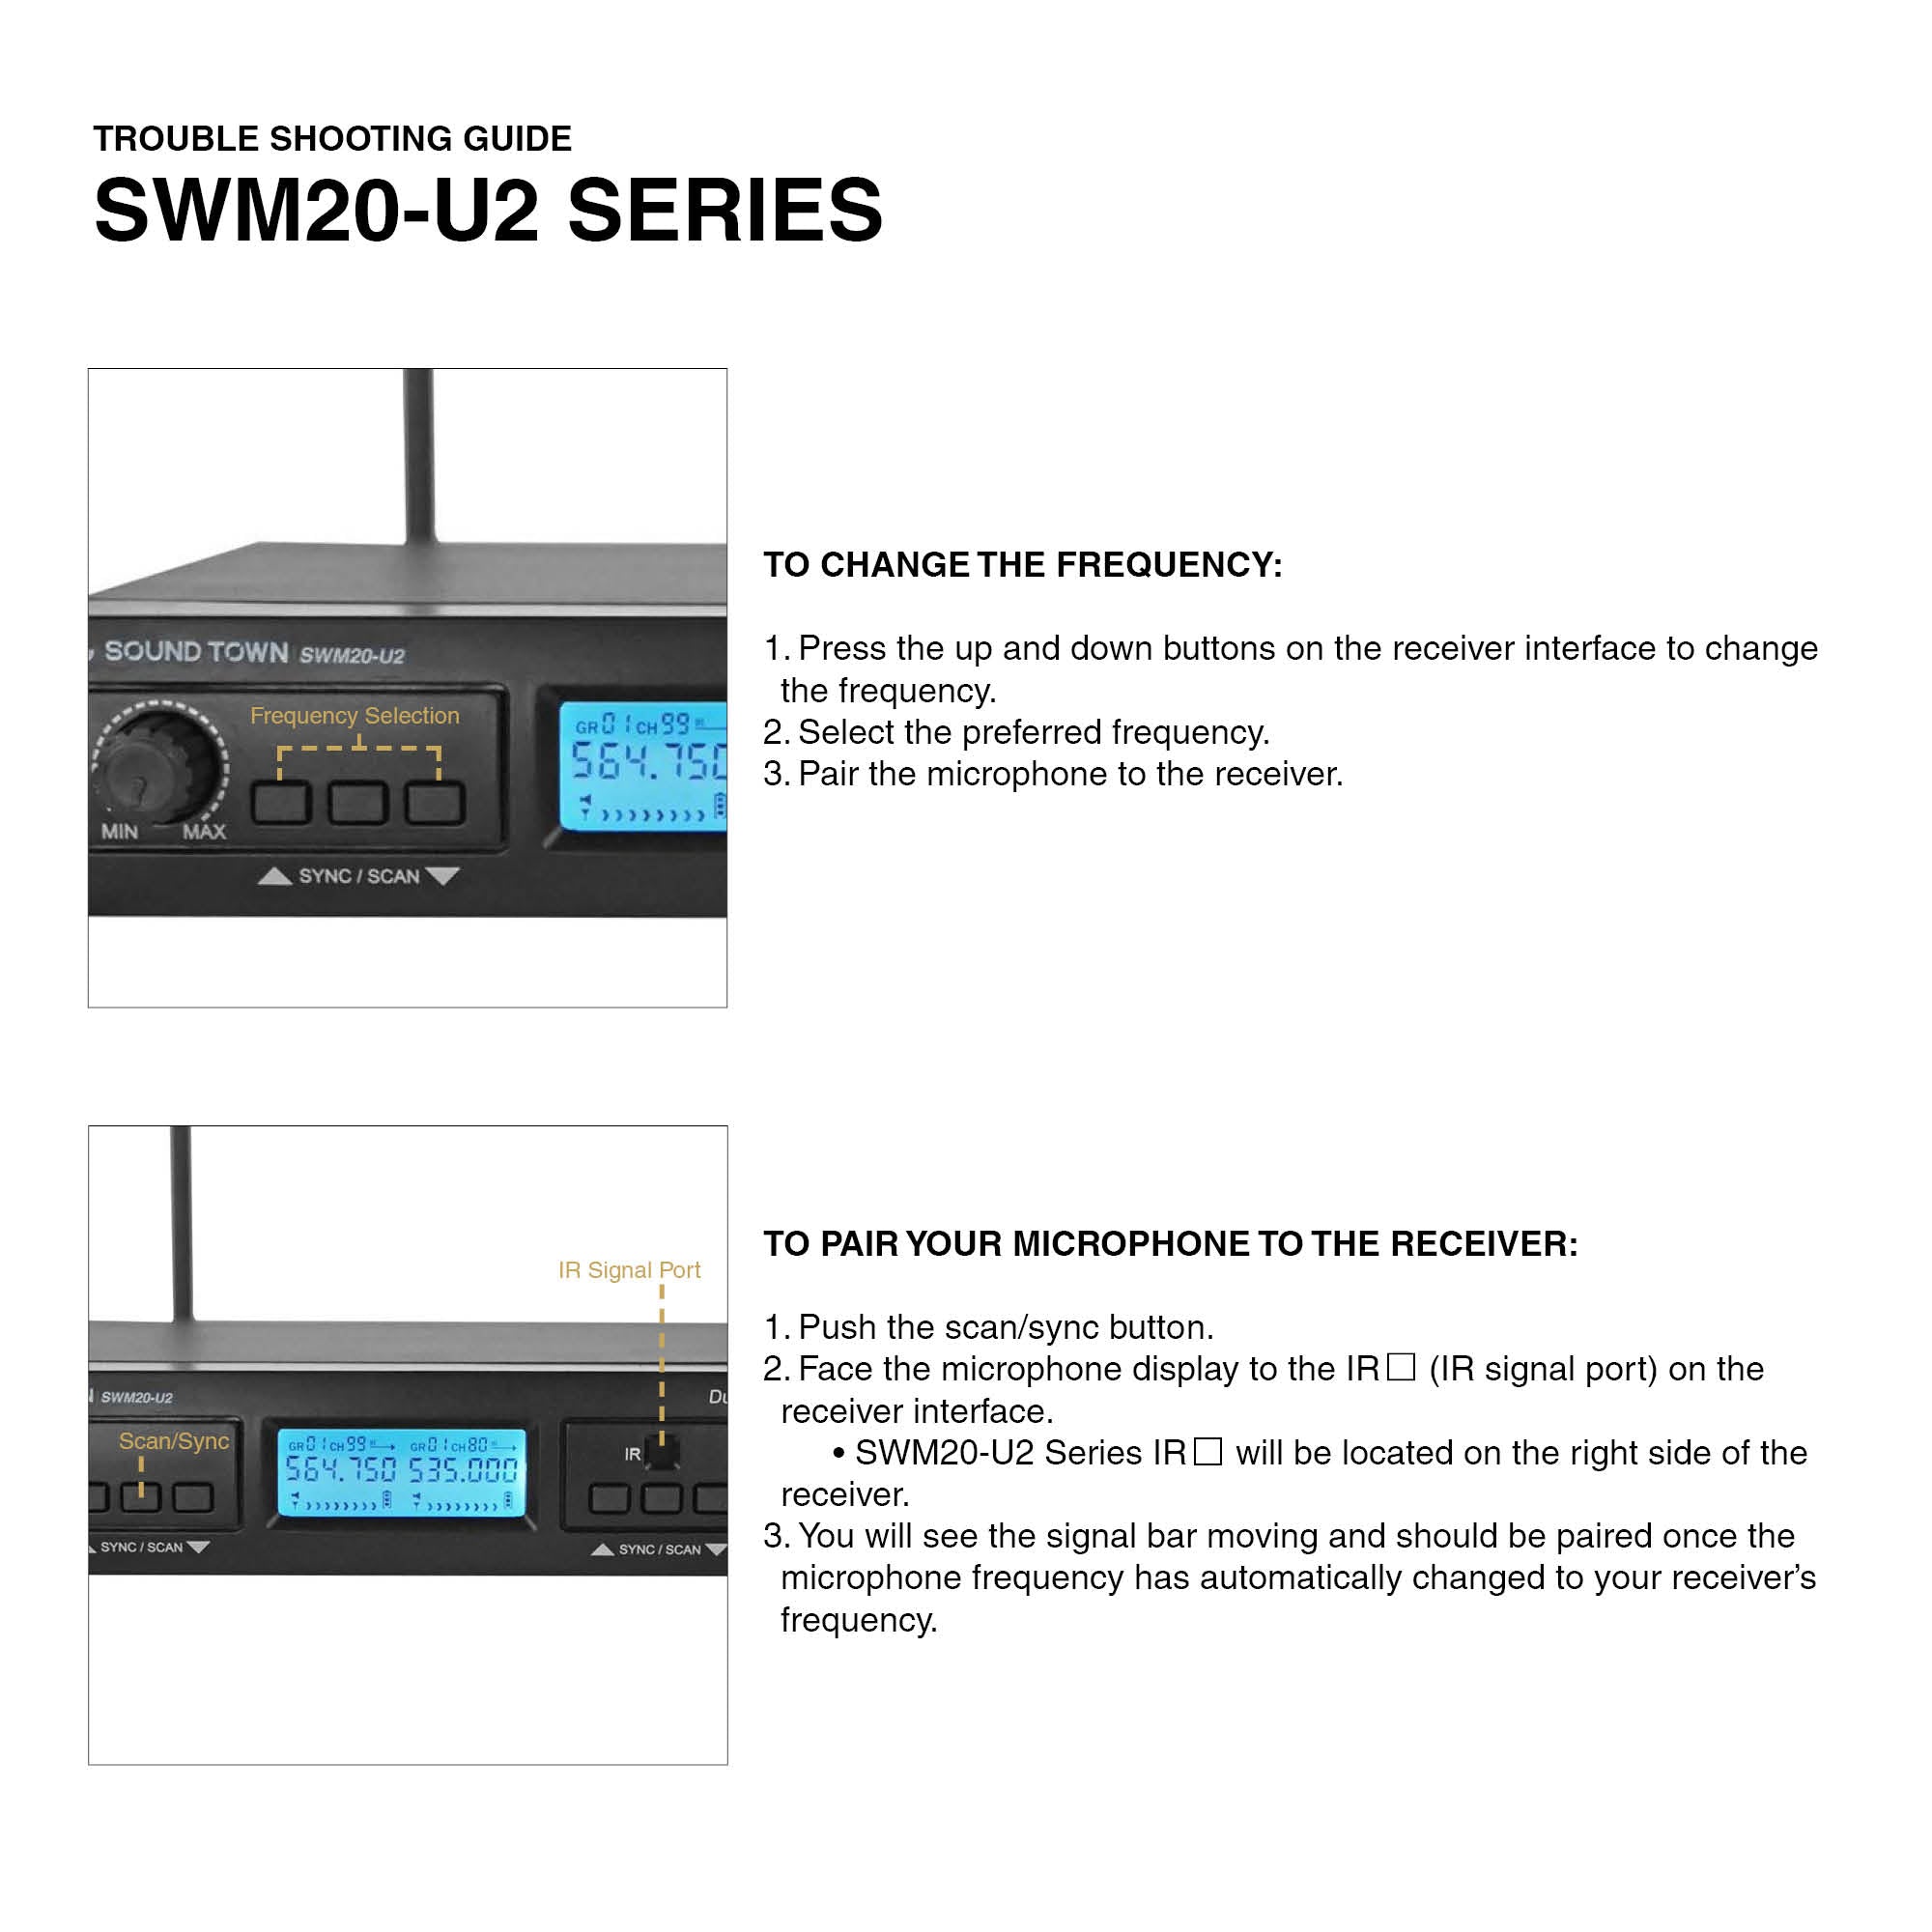 SWM20-U2 SERIES SWM20-U2HH SWM20-U2HB SWM20-U2BB Troubleshooting Guide How to Connect Sync Microphone to Receiver How to Change the Frequency